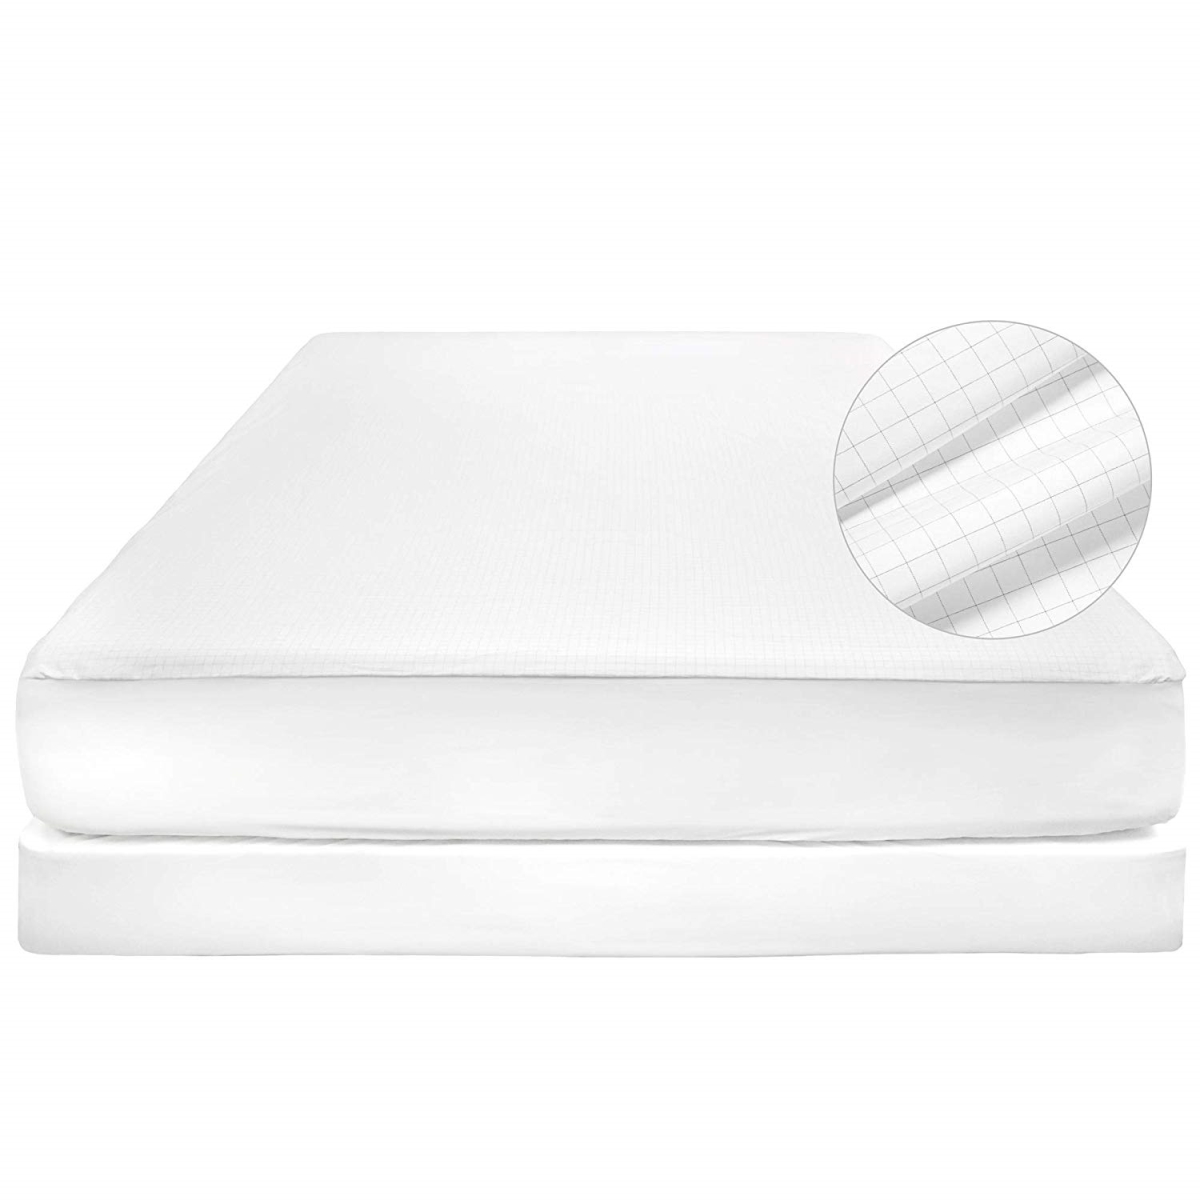 733392 Sleep Solutions By Carbon-infused Waterproof Mattress Protector, White - Twin Size